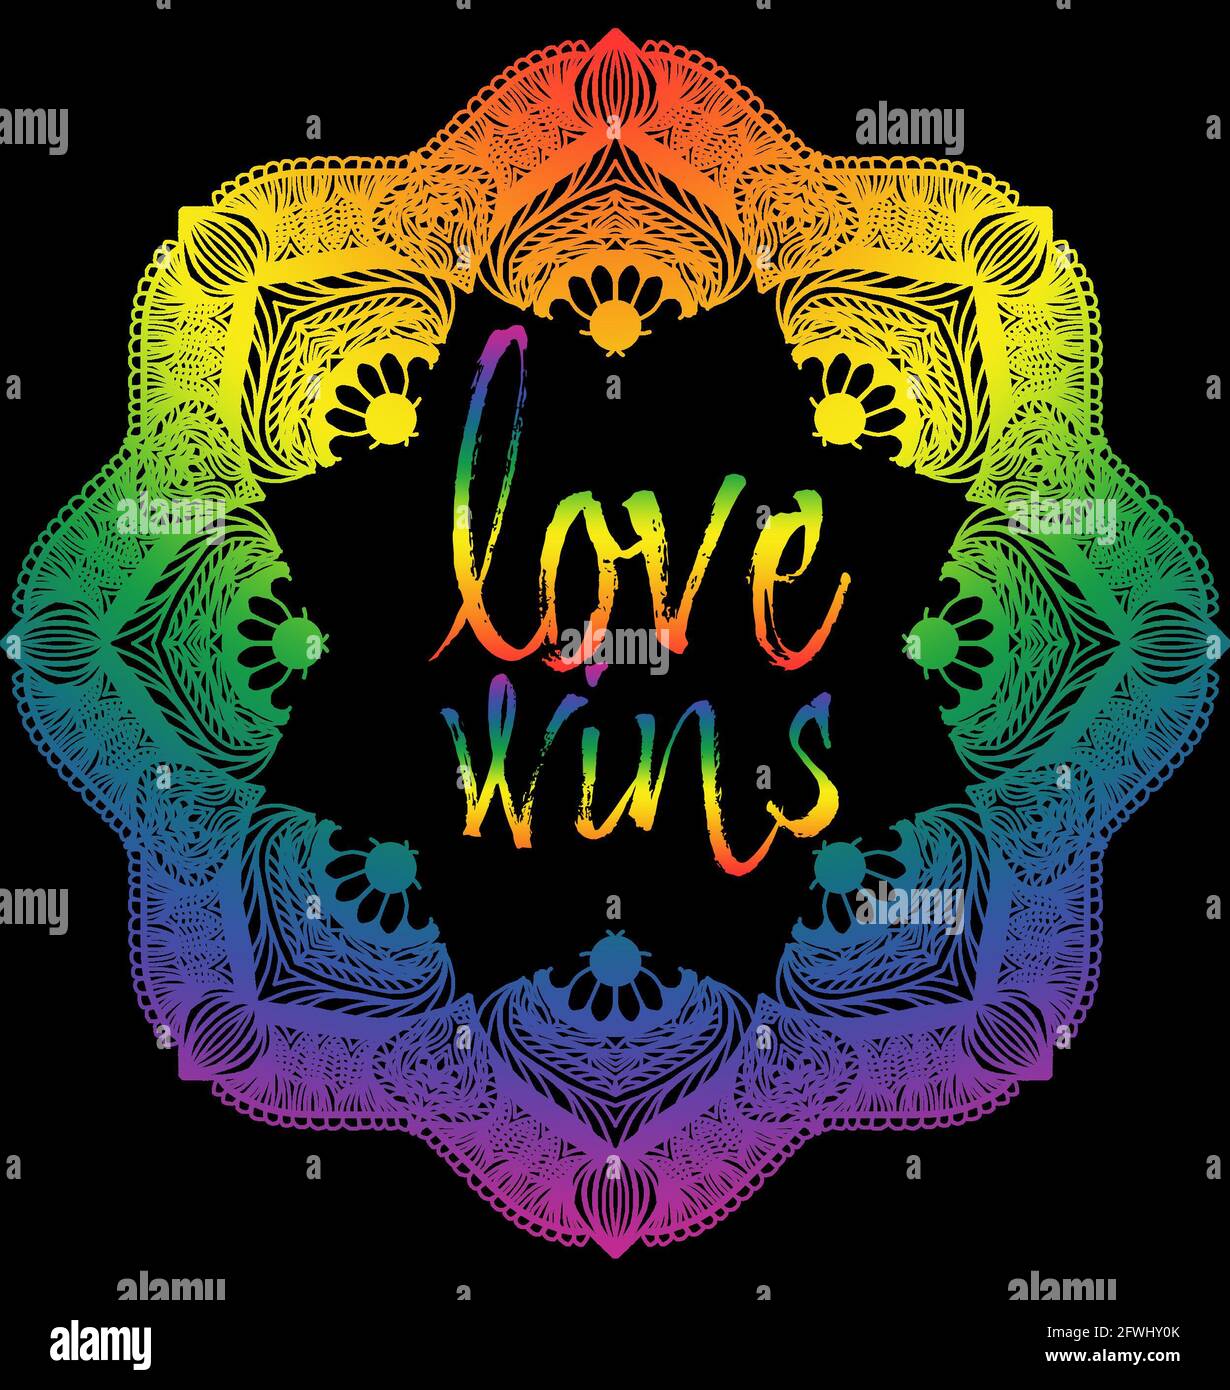 LOVE WINS Pride LGBTQ themed hand drawn mandala with black background and rainbow colors. Stock Photo